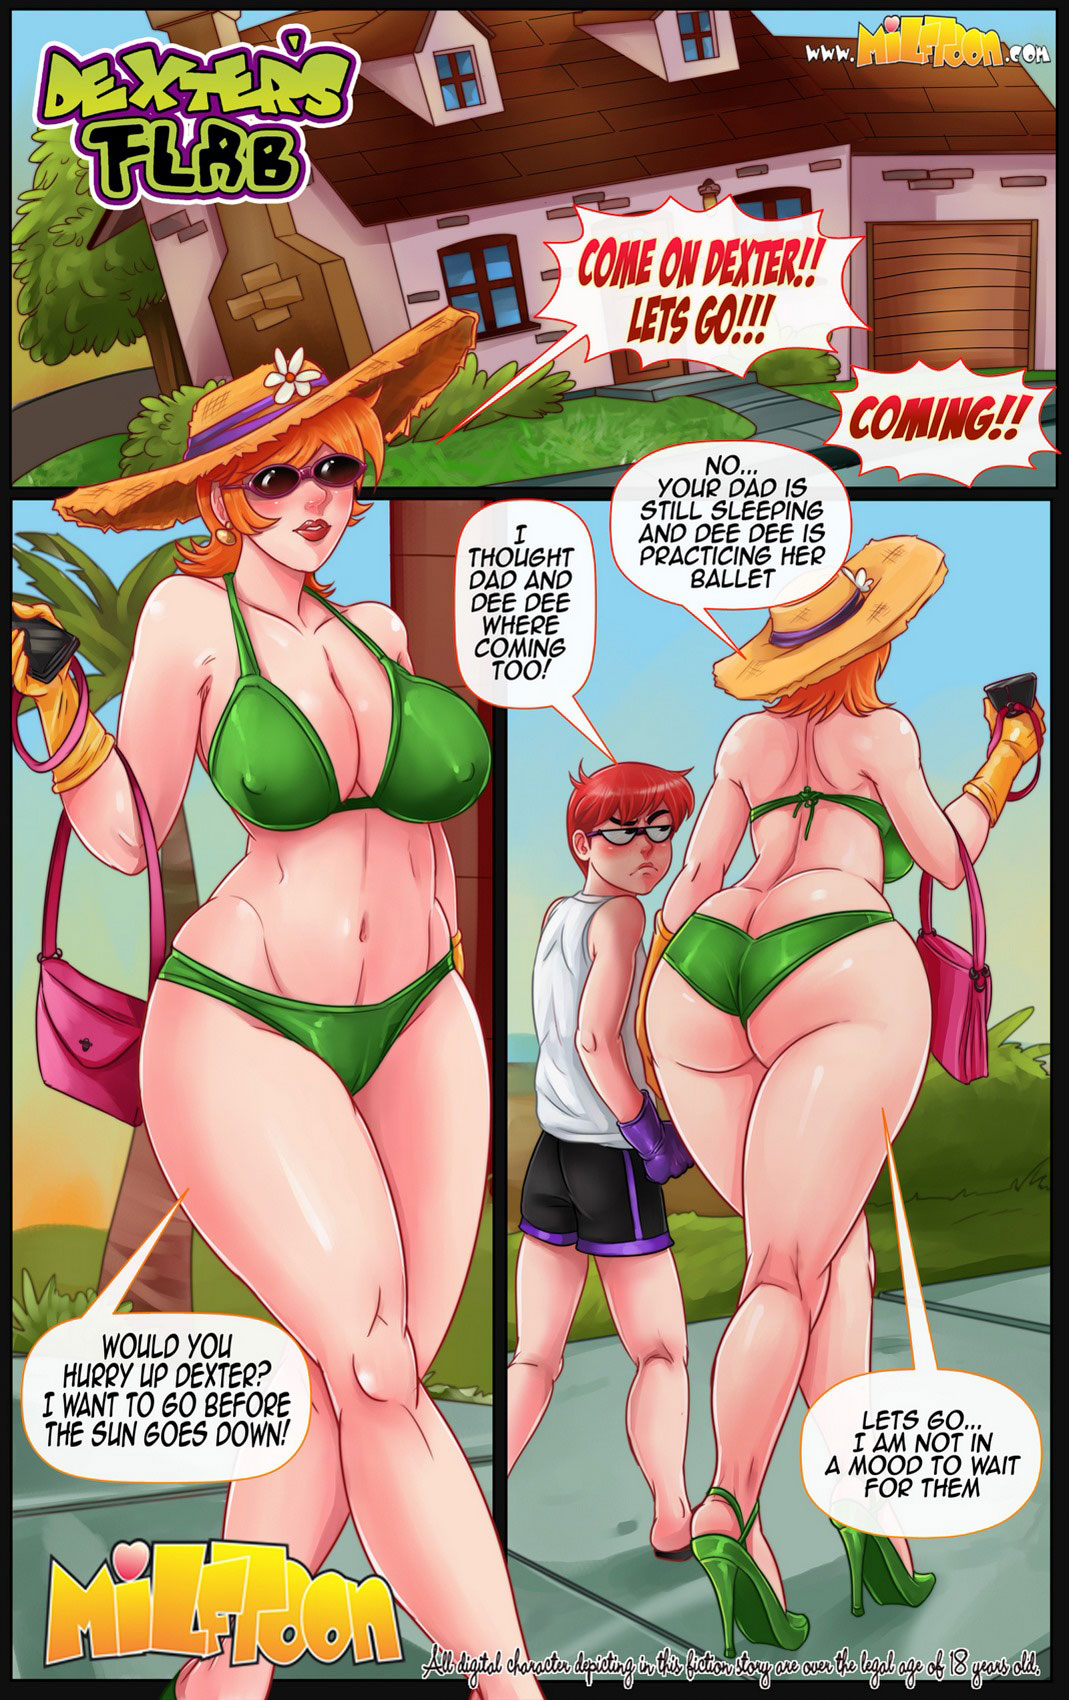 Milftoon comic "Dexter's Flab" - page 1